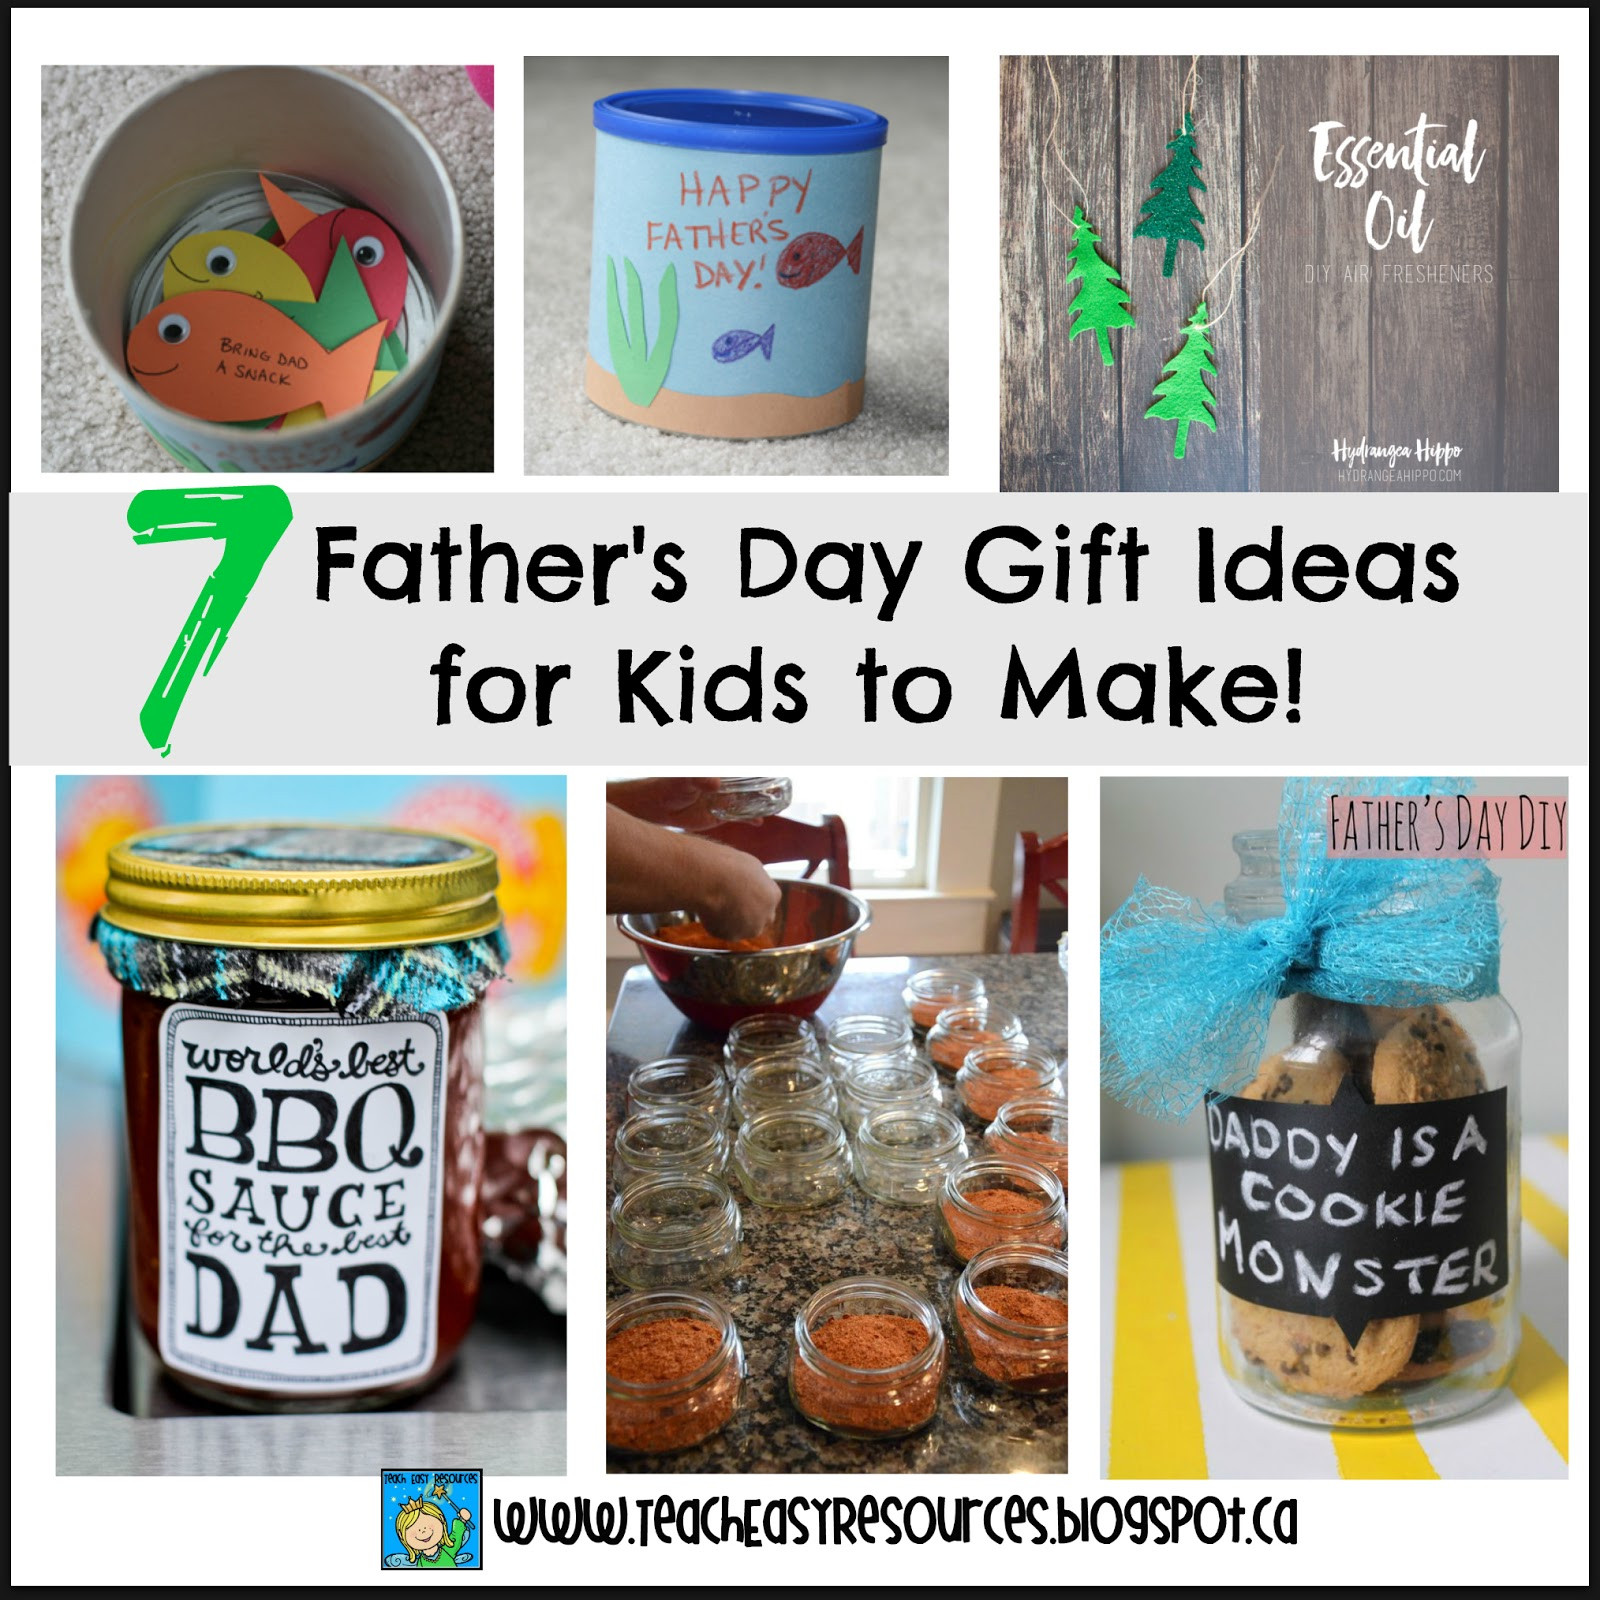 Fathers Day Presents Ideas
 Teach Easy Resources Father s Day Gift Ideas that Kids